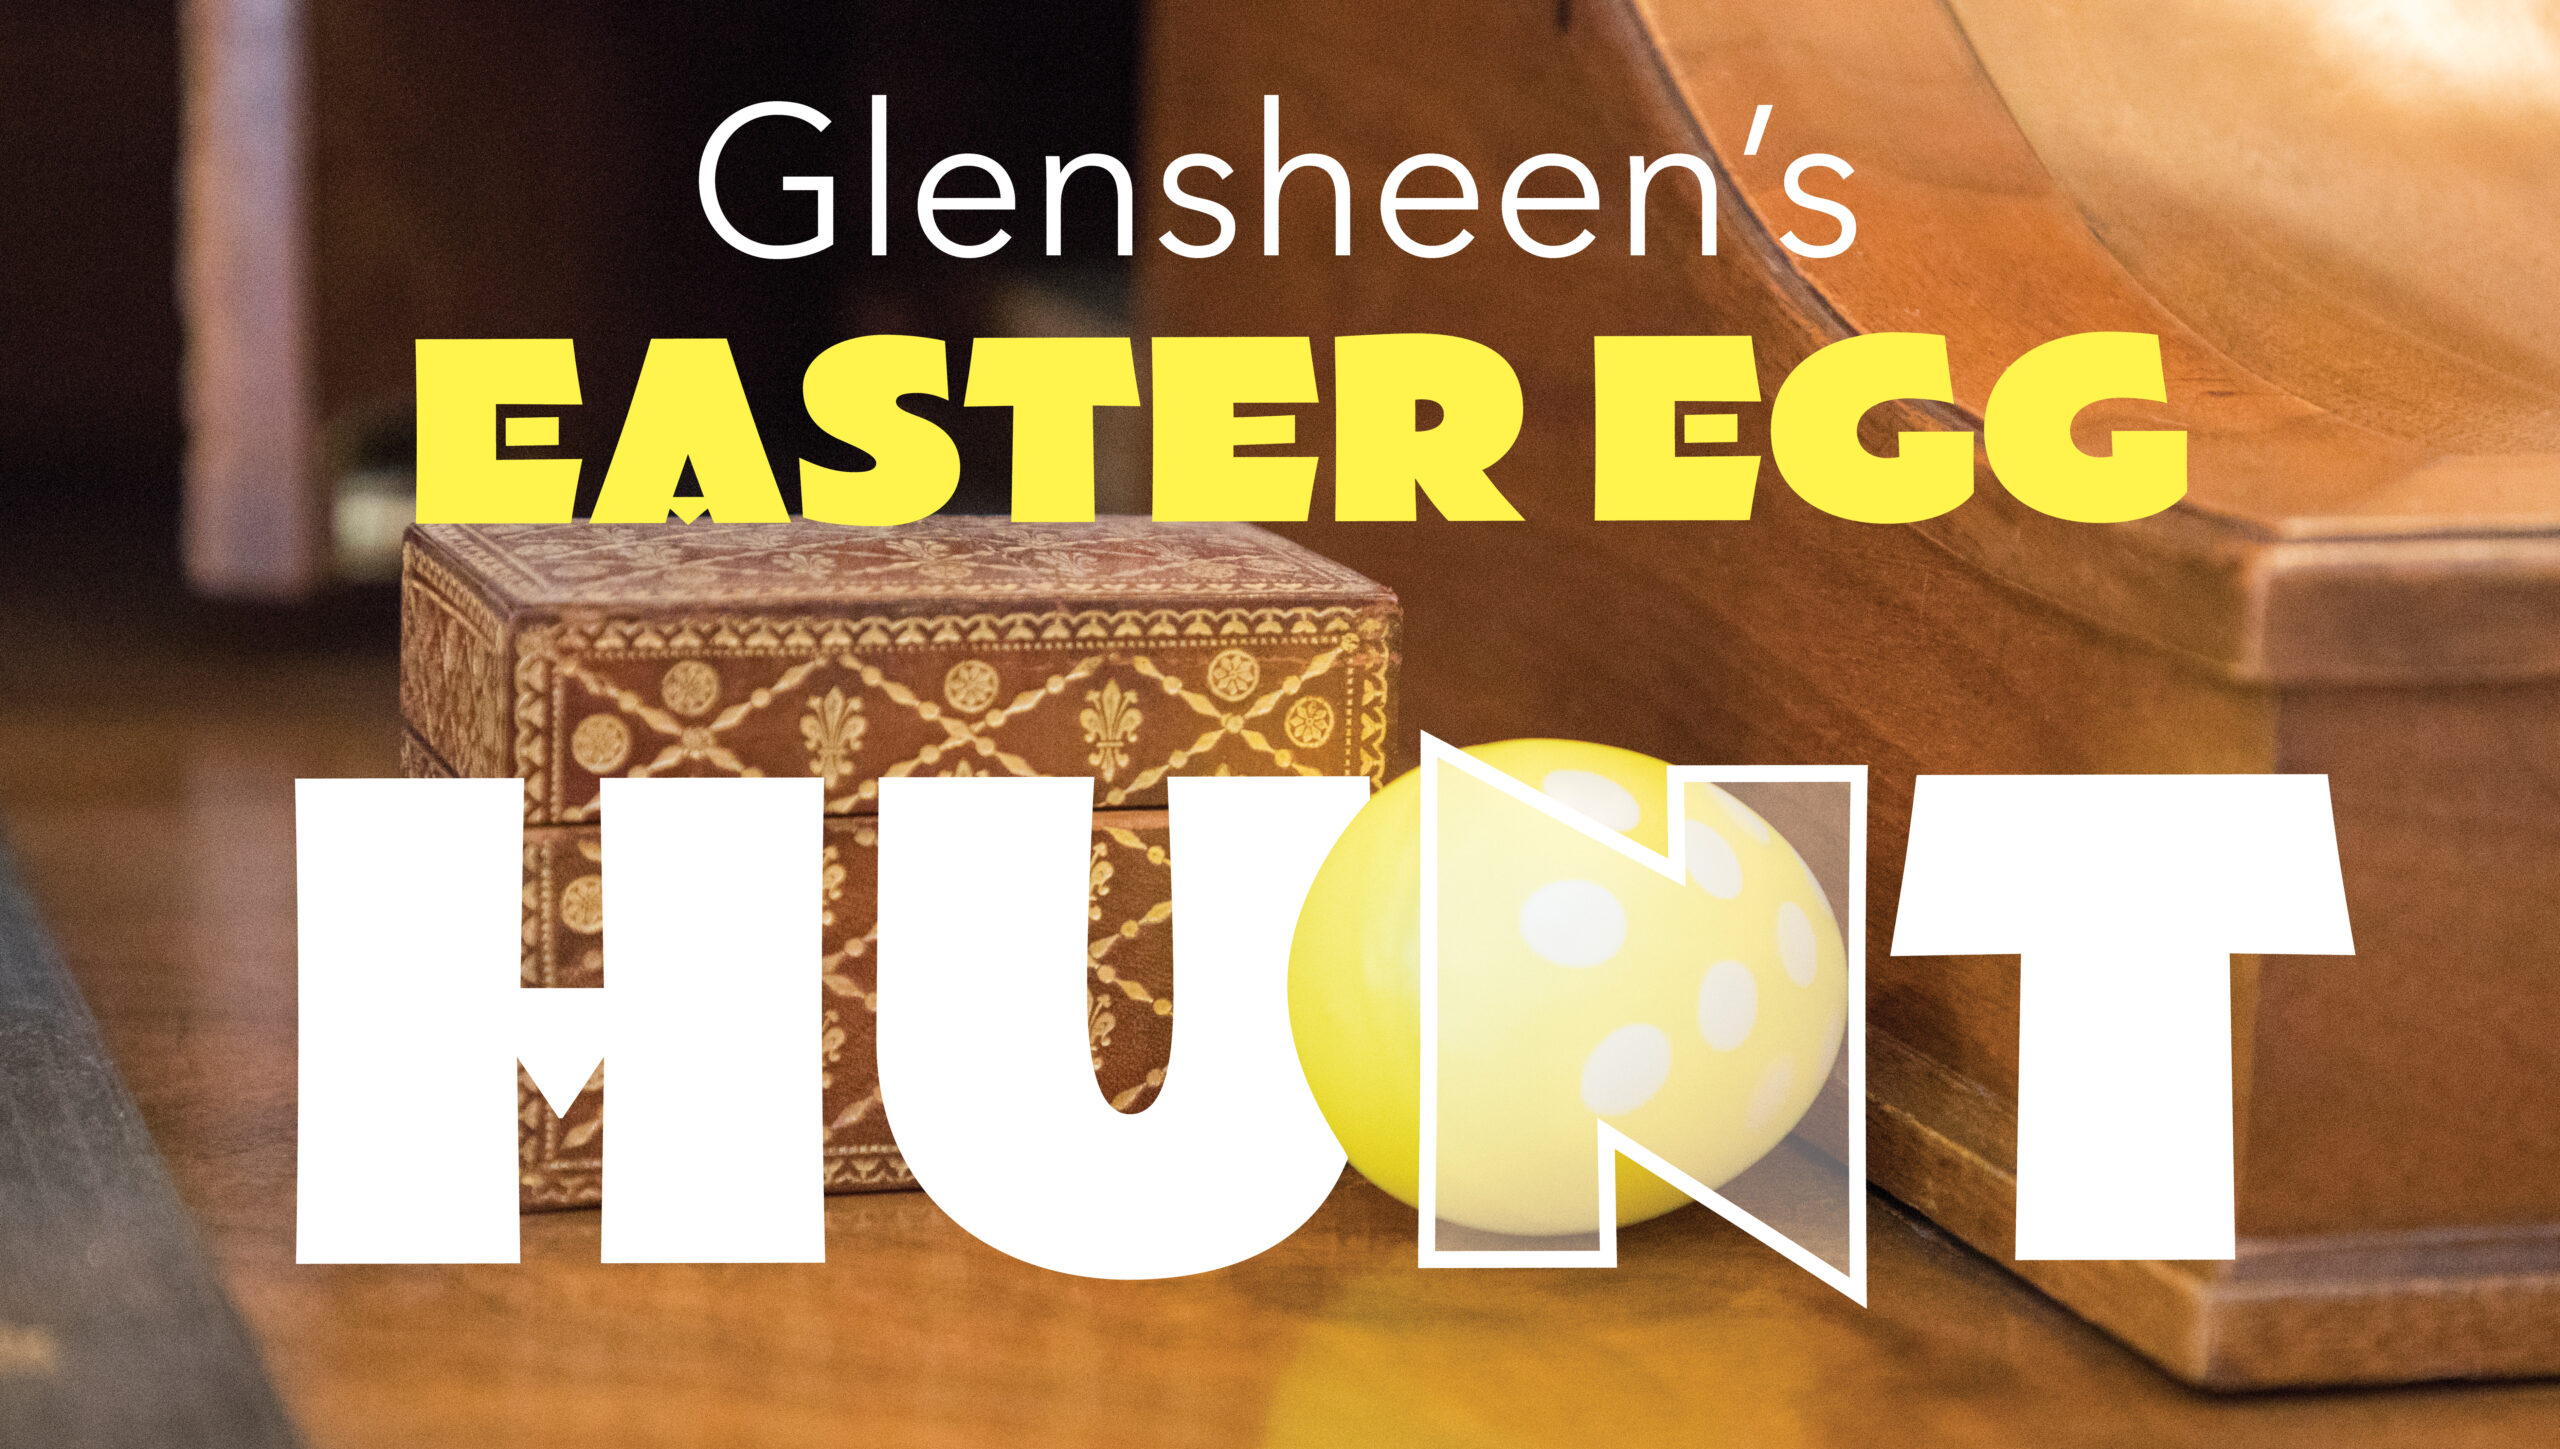 Glensheen's Easter Egg Hunt with a yellow egg on a wooden table.